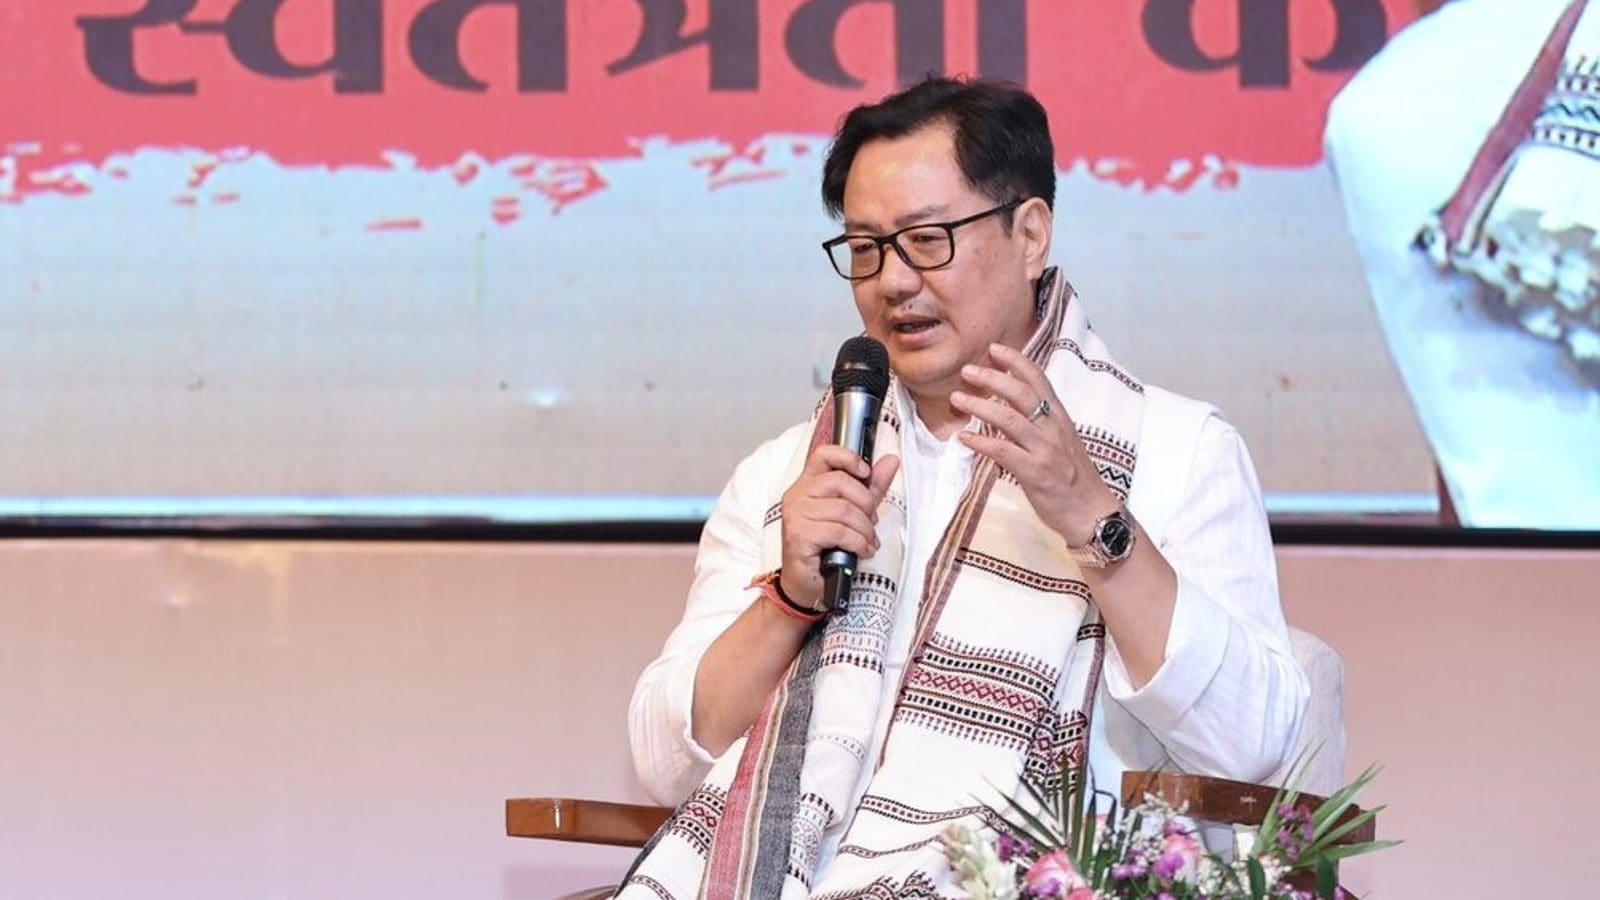 Law Min Rijiju Okay With Same-sex Couplesâ€™ Rights But For Marriage Saysâ€¦